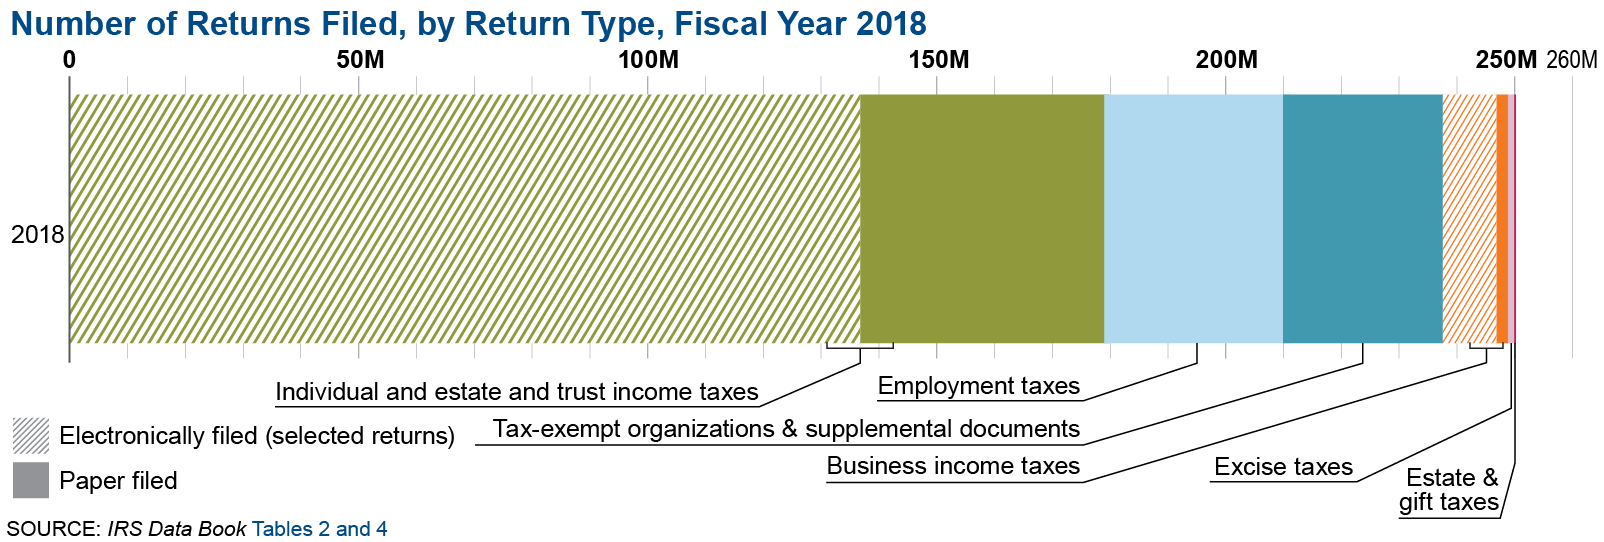 Tax Refund Table Chart